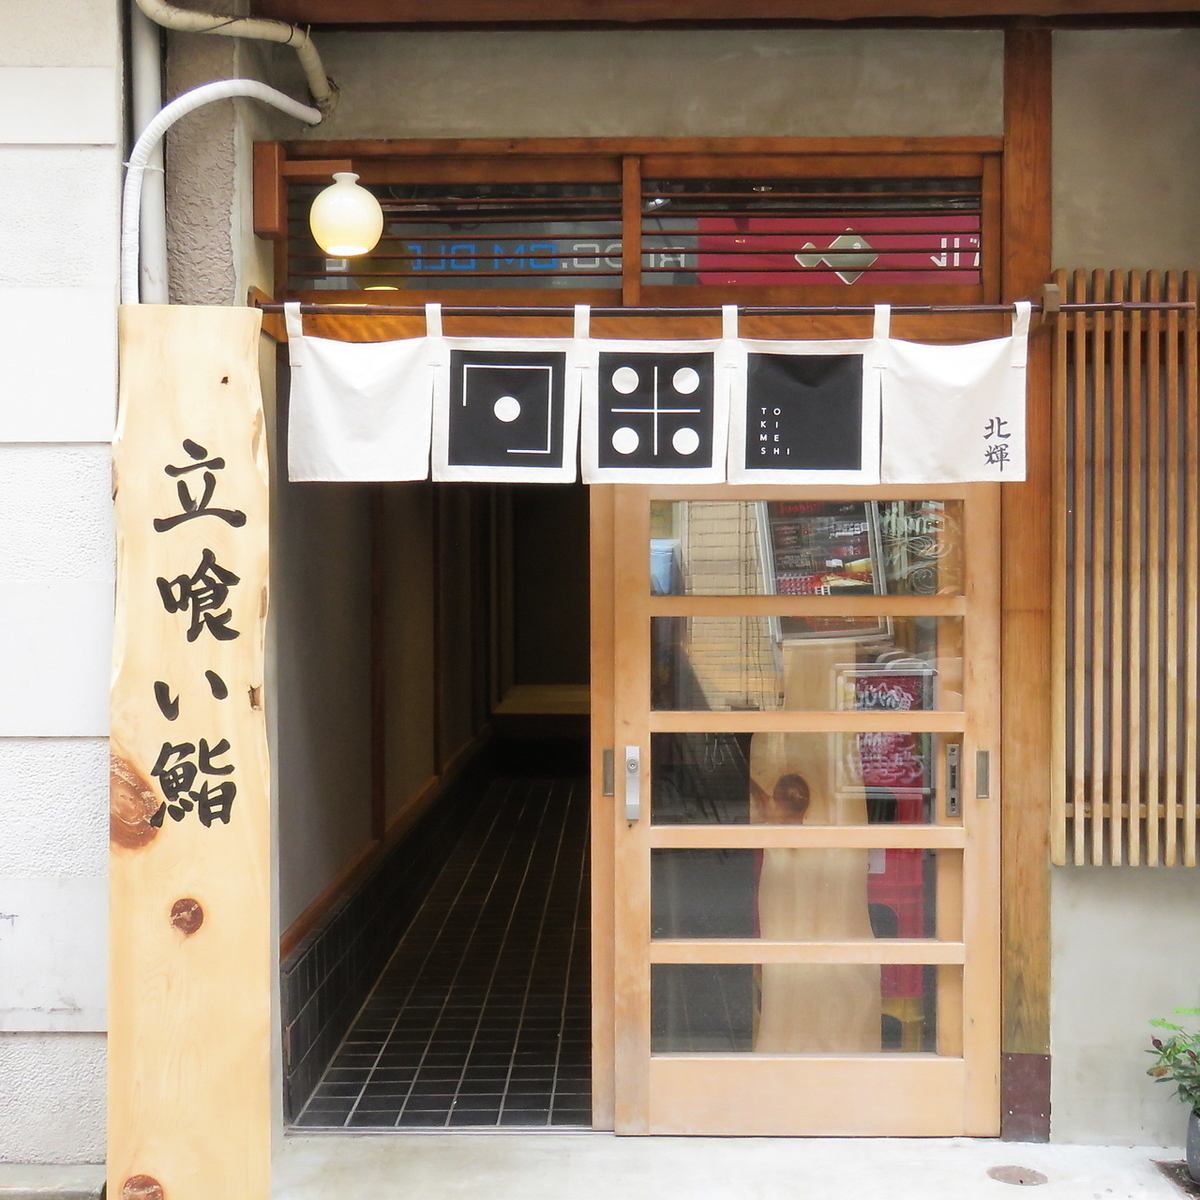 A sushi restaurant that is particular about space and food.A full-fledged grip to eat in a stylish space.